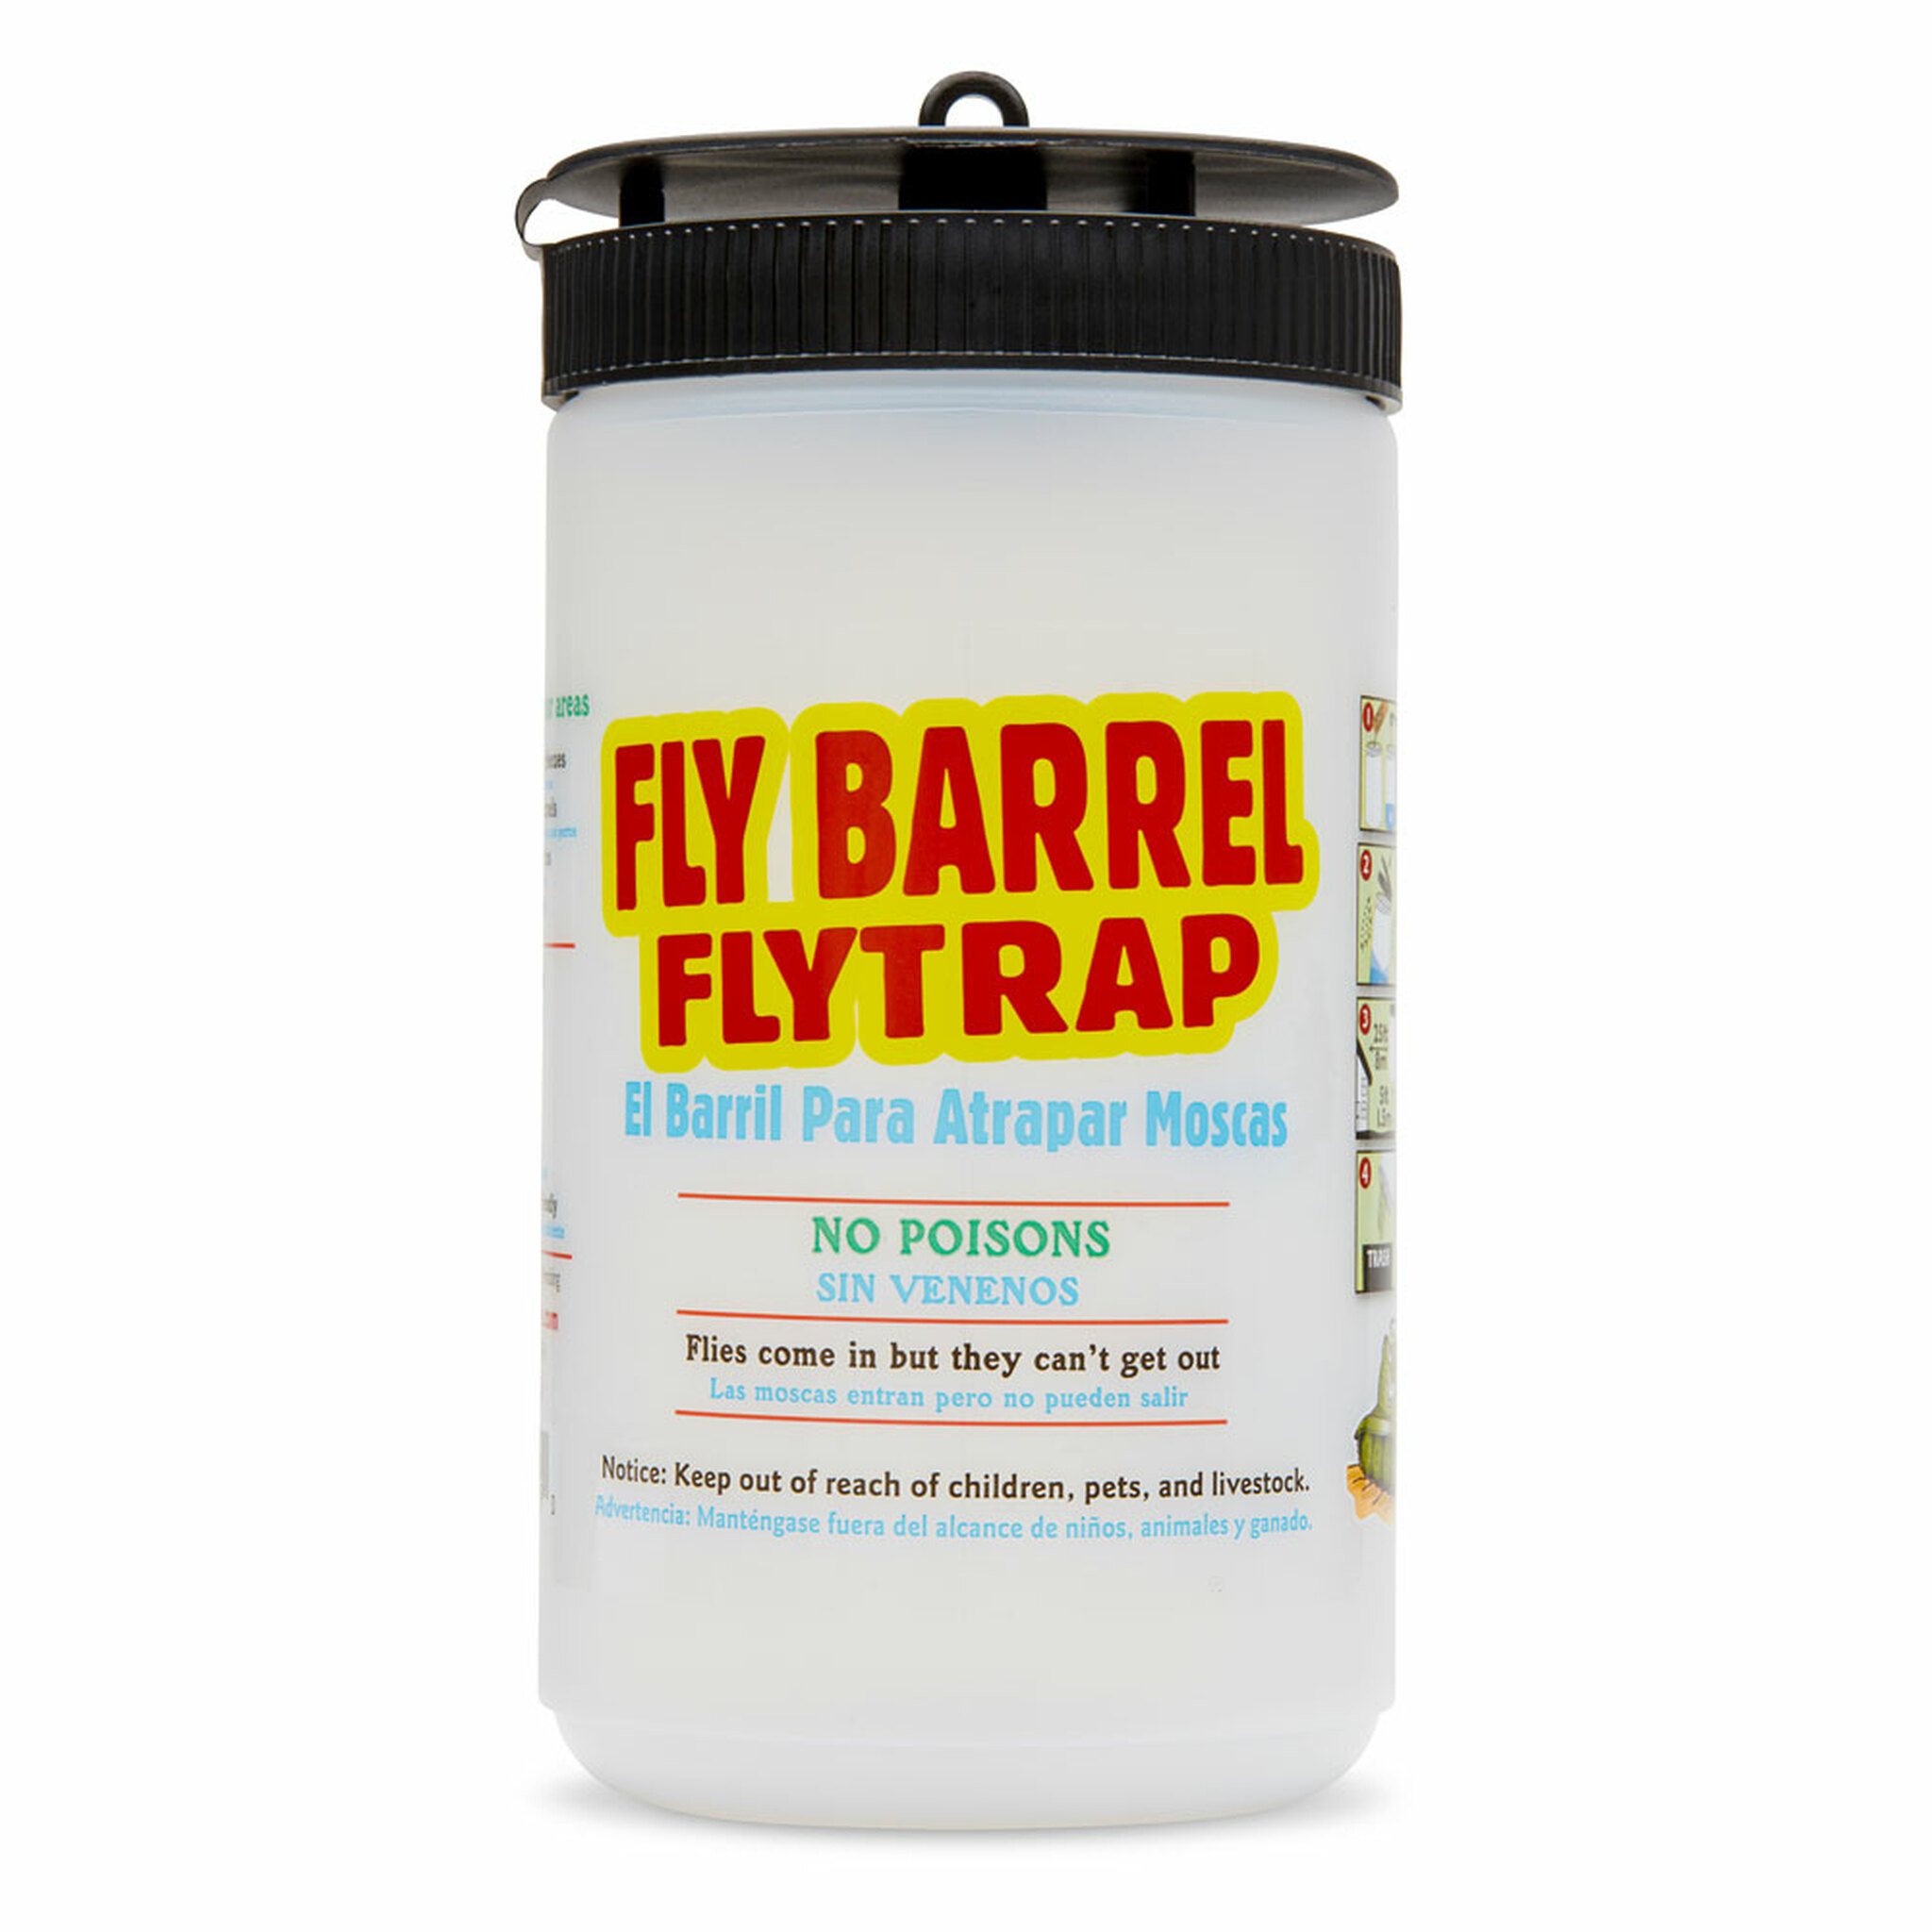 FLIES BE GONE FLY BARREL, COMPLETE WITH 2 PACKETS KM34